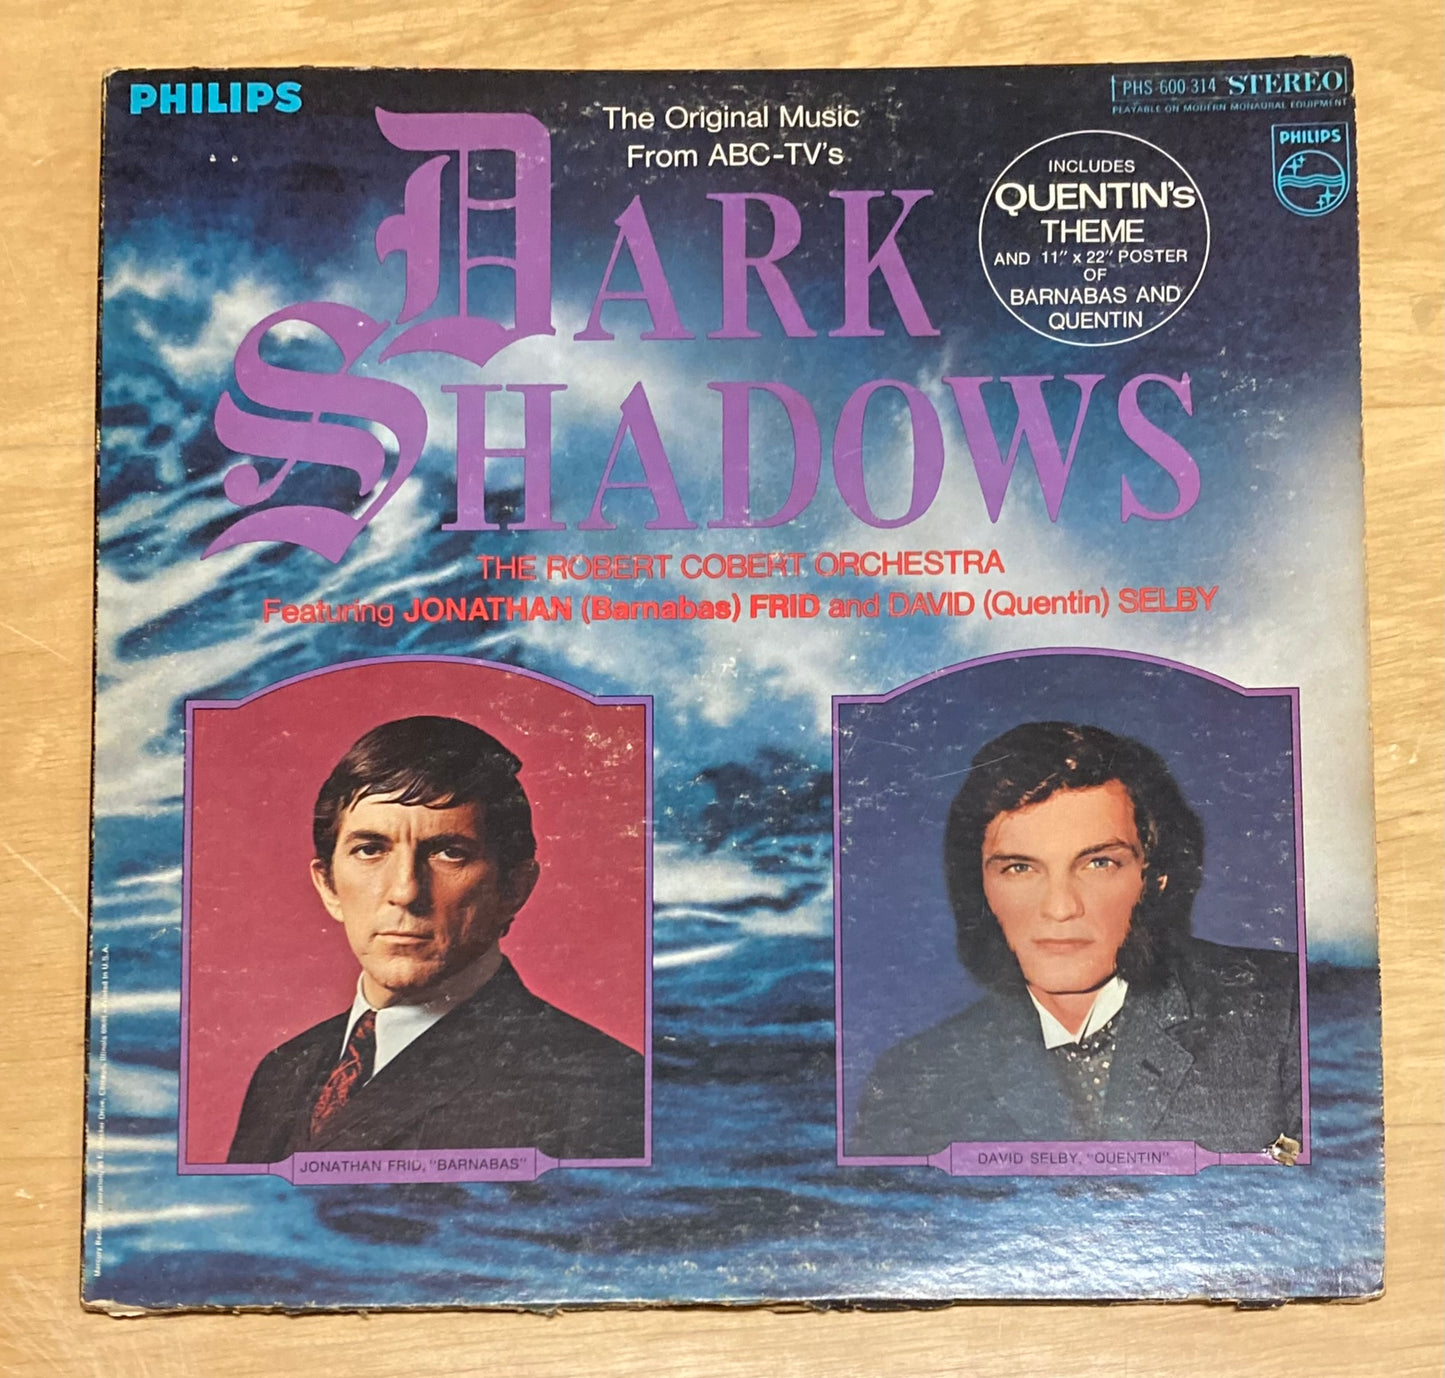 The Original Music From ABC-TV's Dark Shadows - The Robert Cobert Orchestra Featuring Jonathan (Barnabas) Frid And David (Quentin) Selby